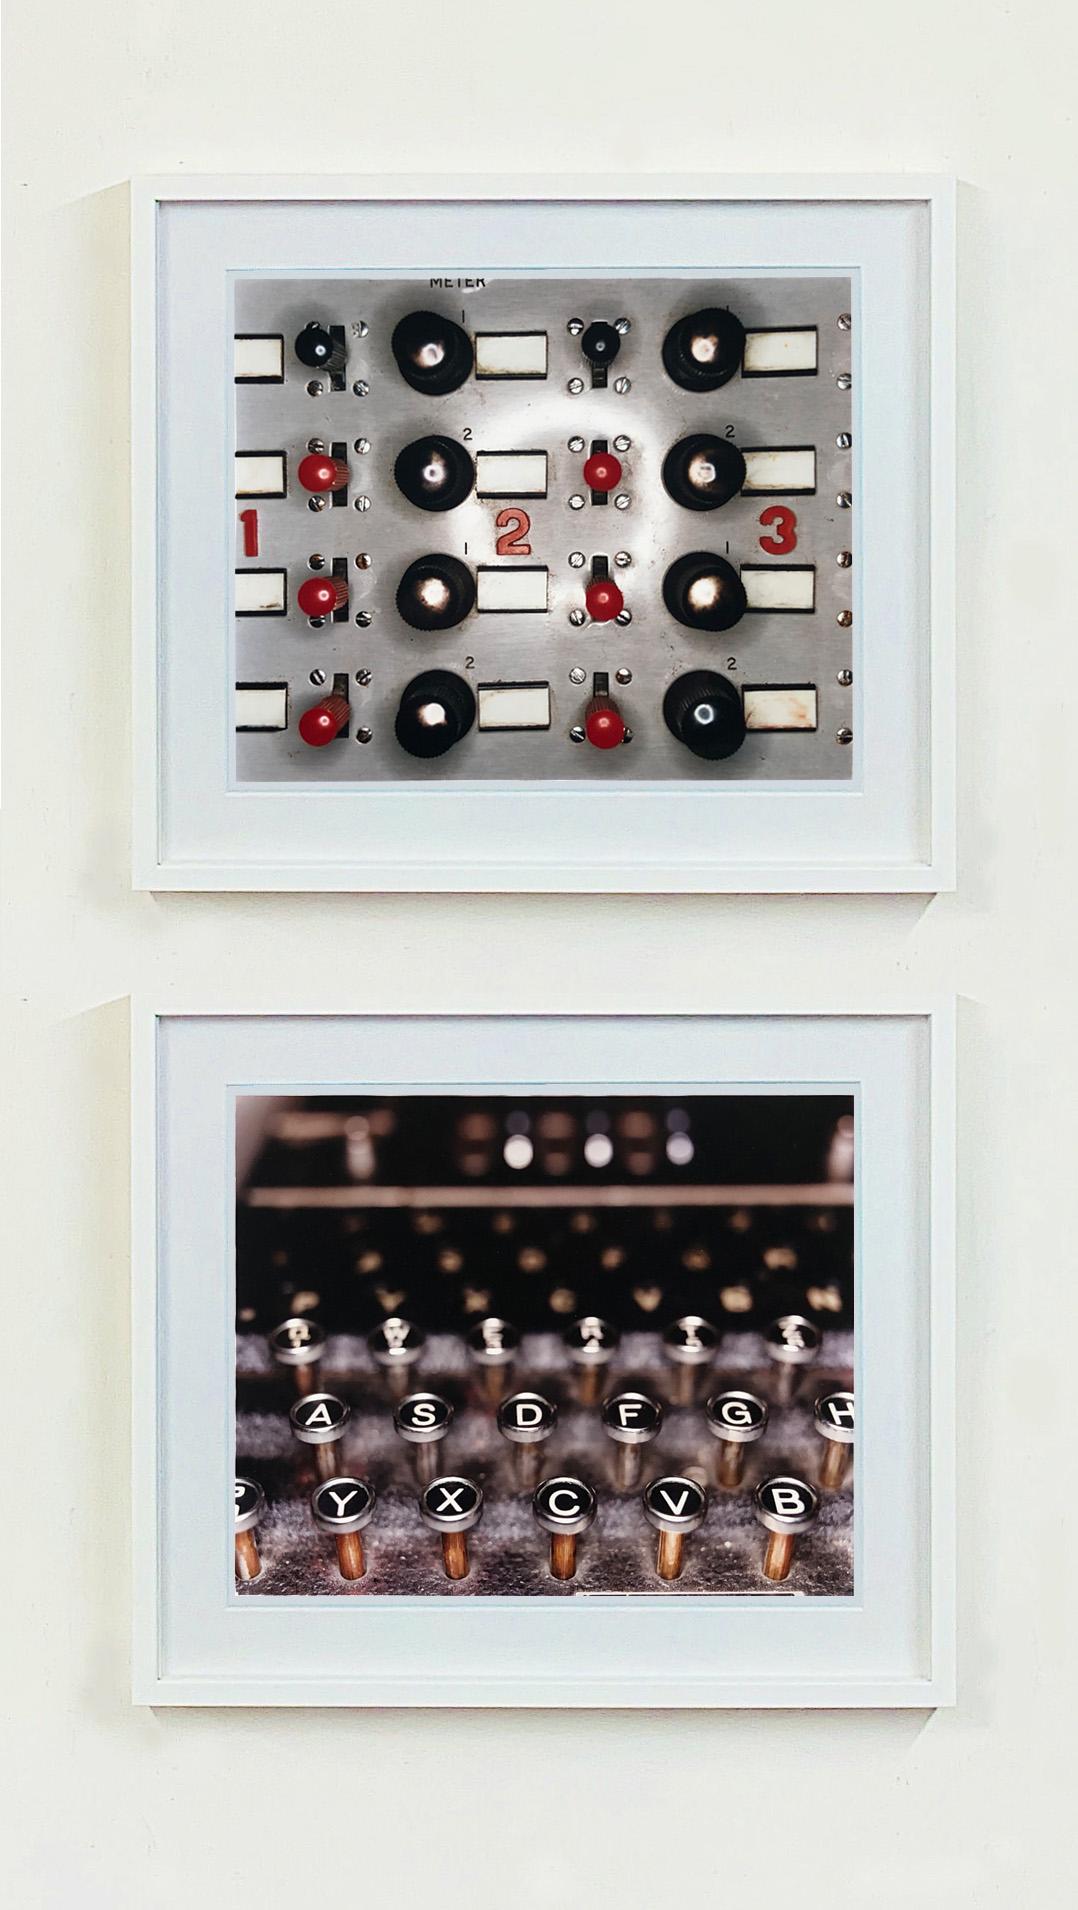 The Enigma Machine, Bletchley Park - British color photography For Sale 1